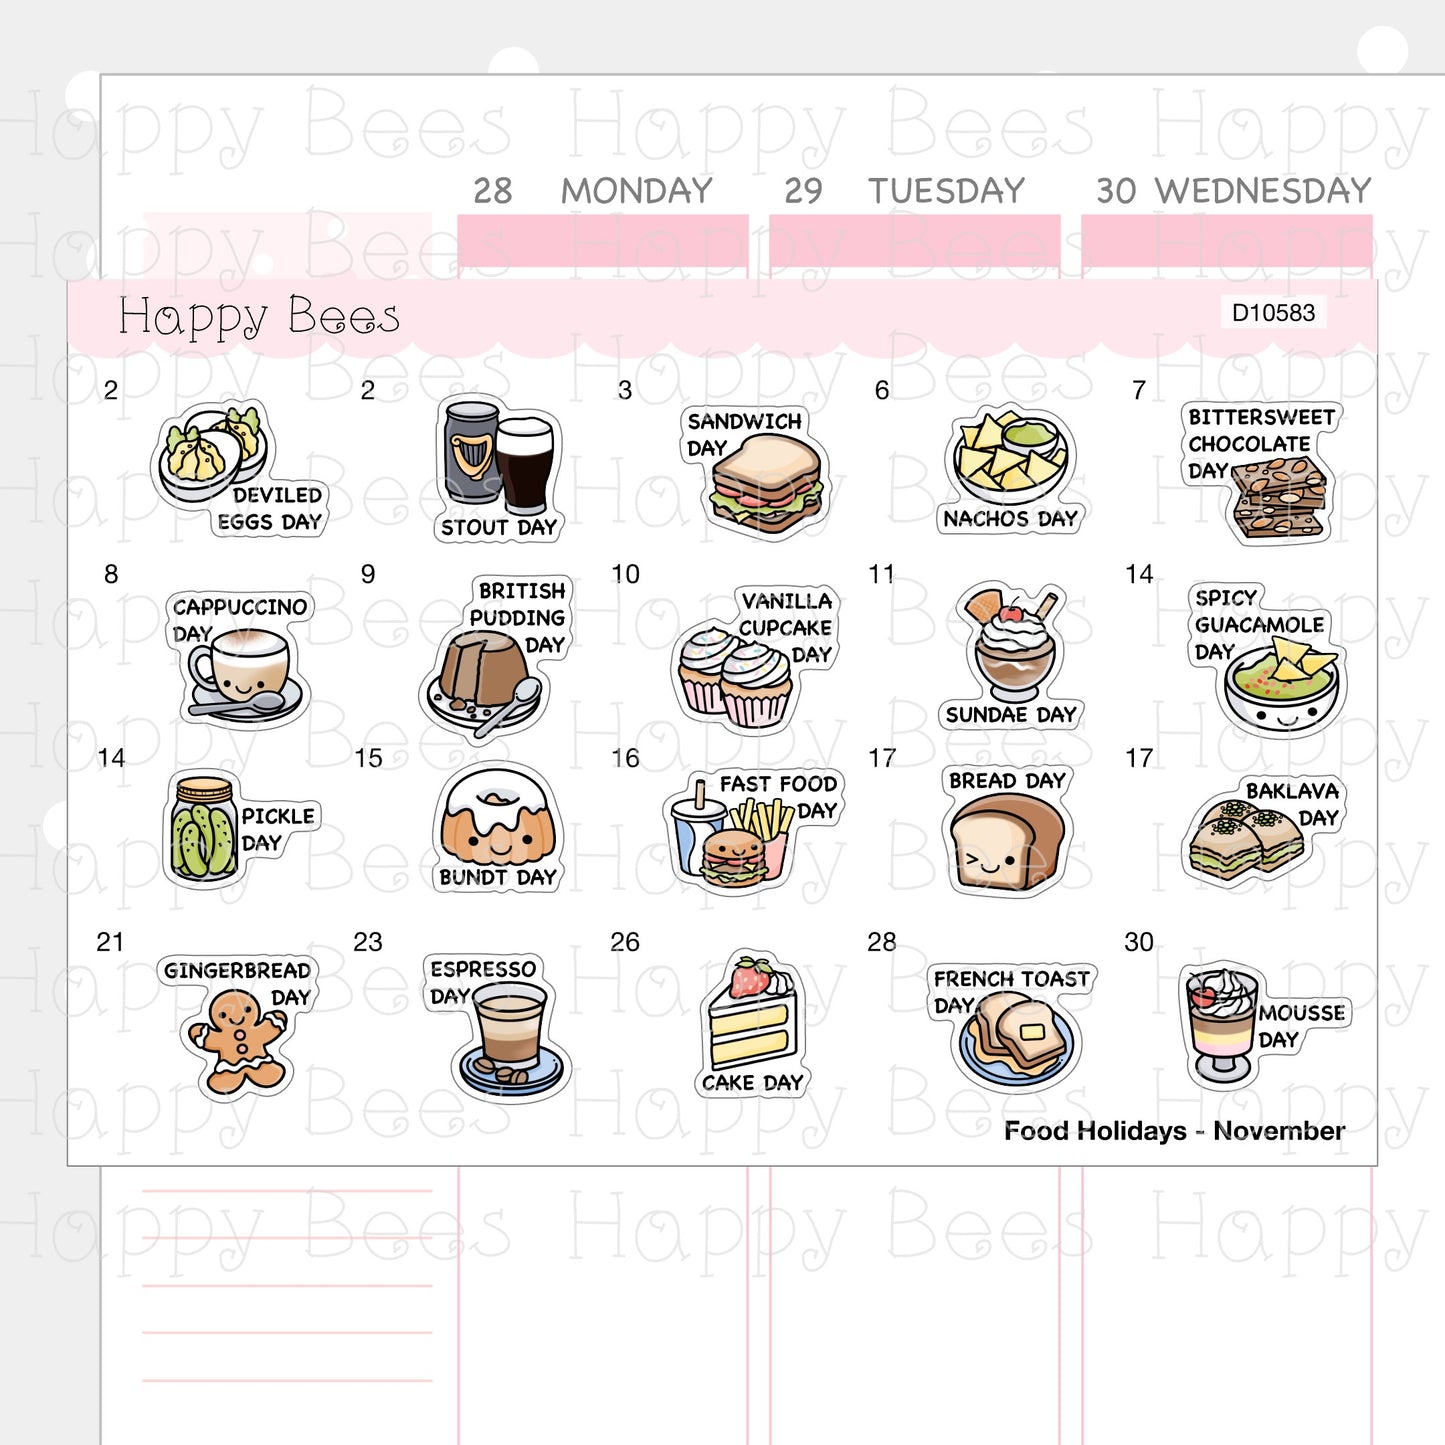 Food Holiday Doodles / July to December 2023 - Cute Festival Planner Stickers